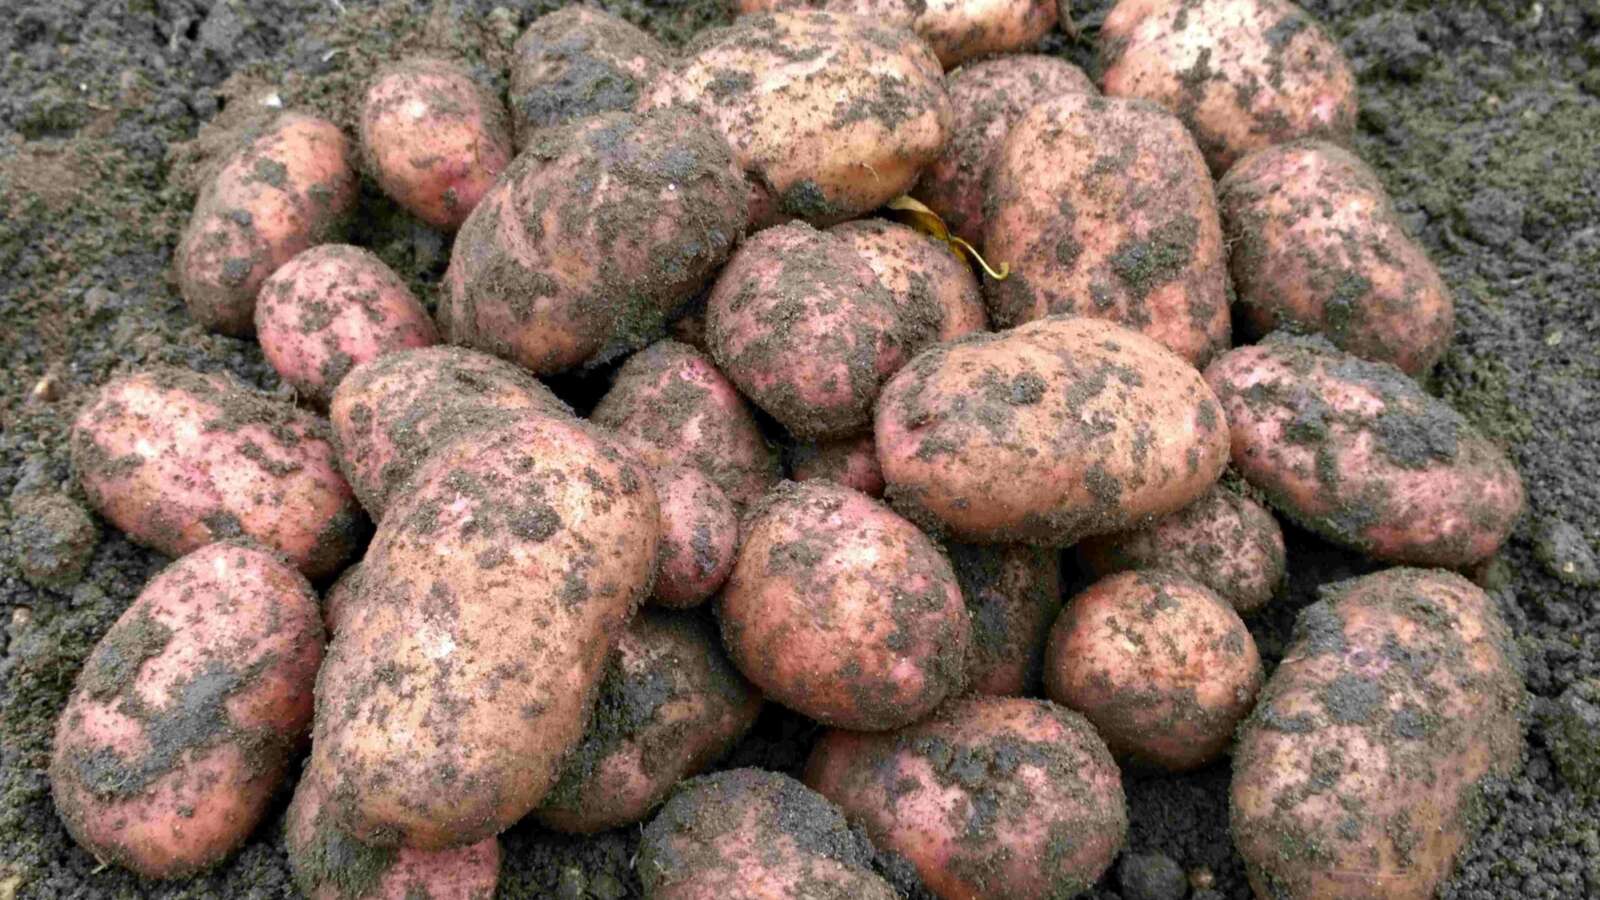 Earthed up Sarpo Mira Potatoes in soil